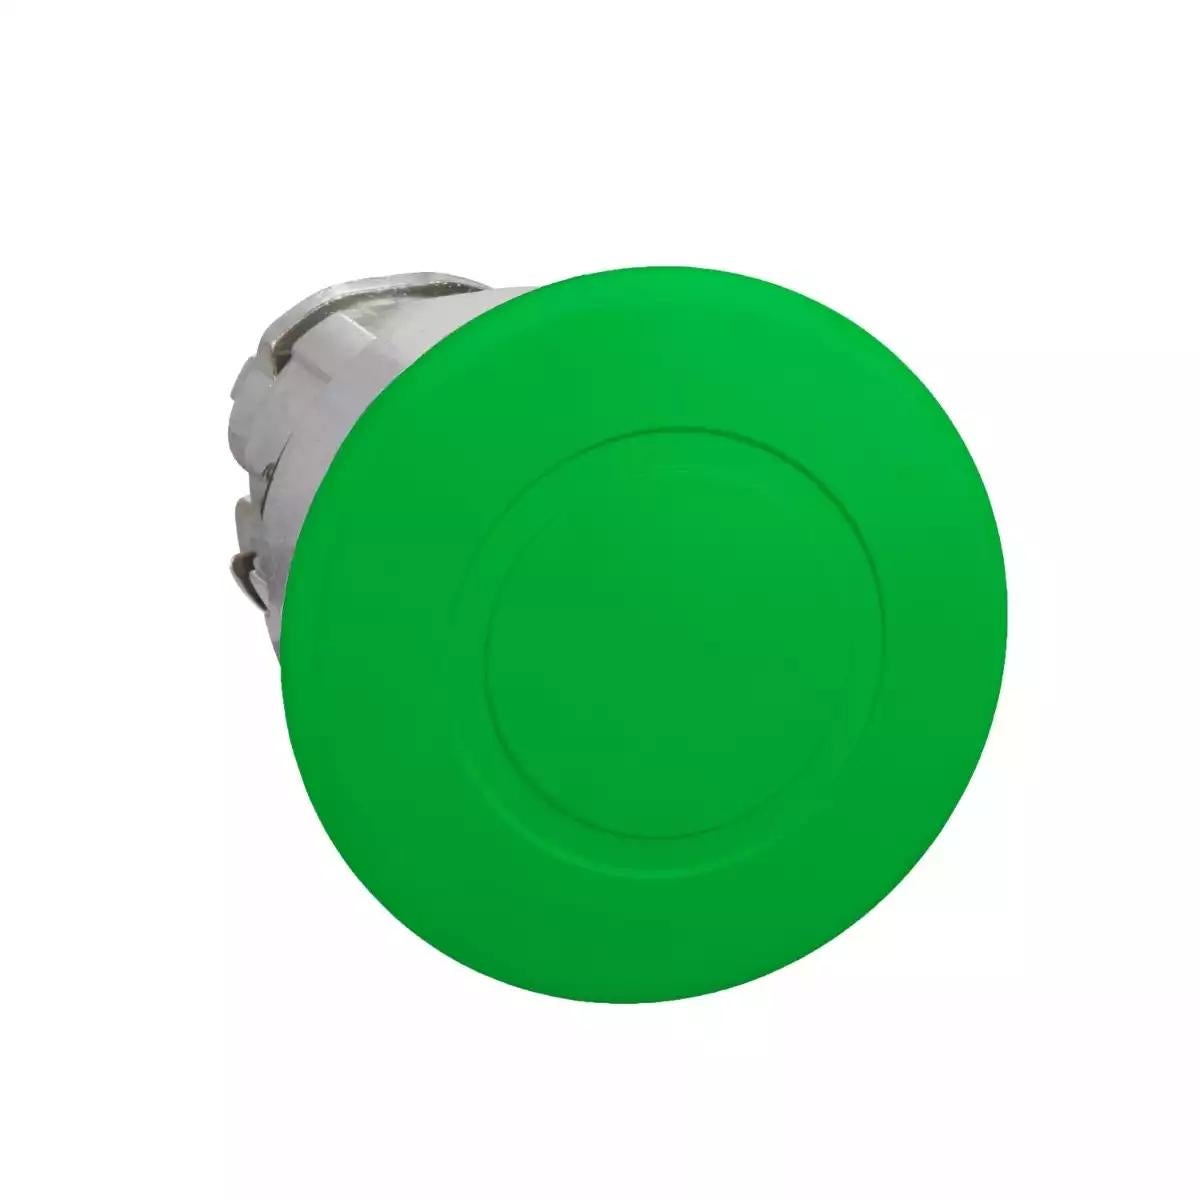 Head for non illuminated push button, Harmony XB4, green mushroom 40mm, 22mm, latching, push-pull to release, unmarked